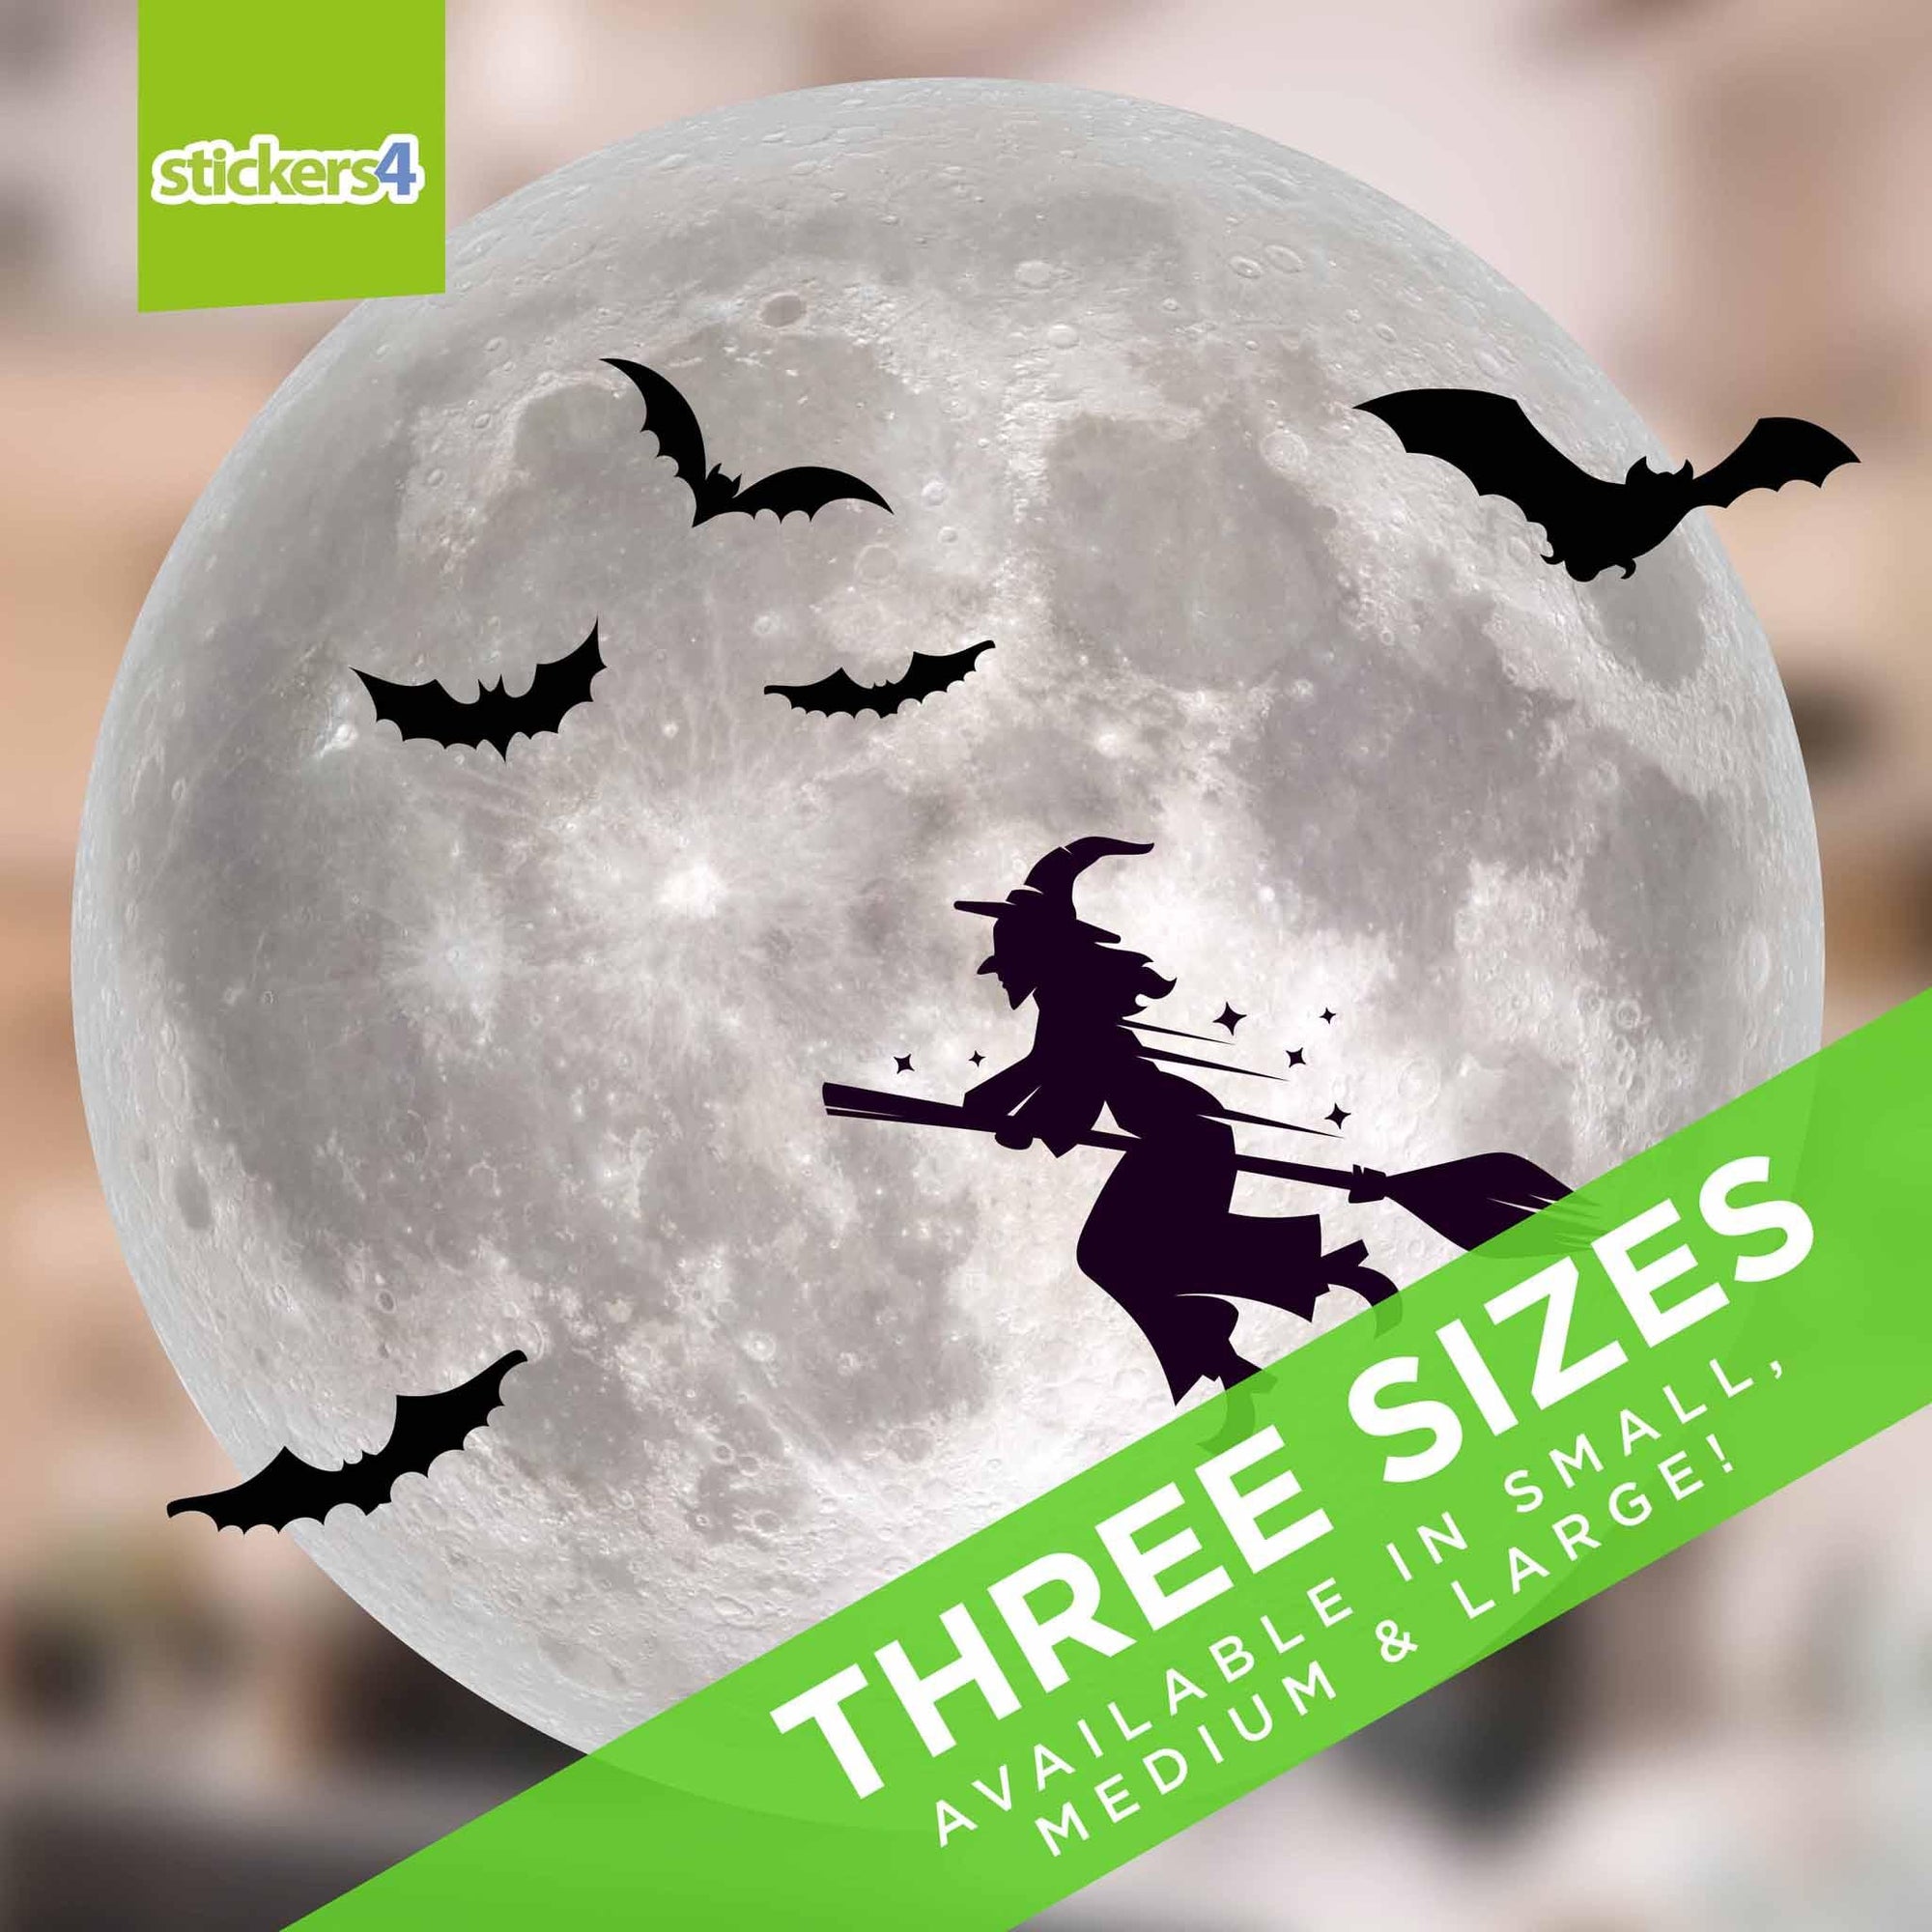 Full Moon with Witch & Bats Silhouette Window Sticker Halloween Display